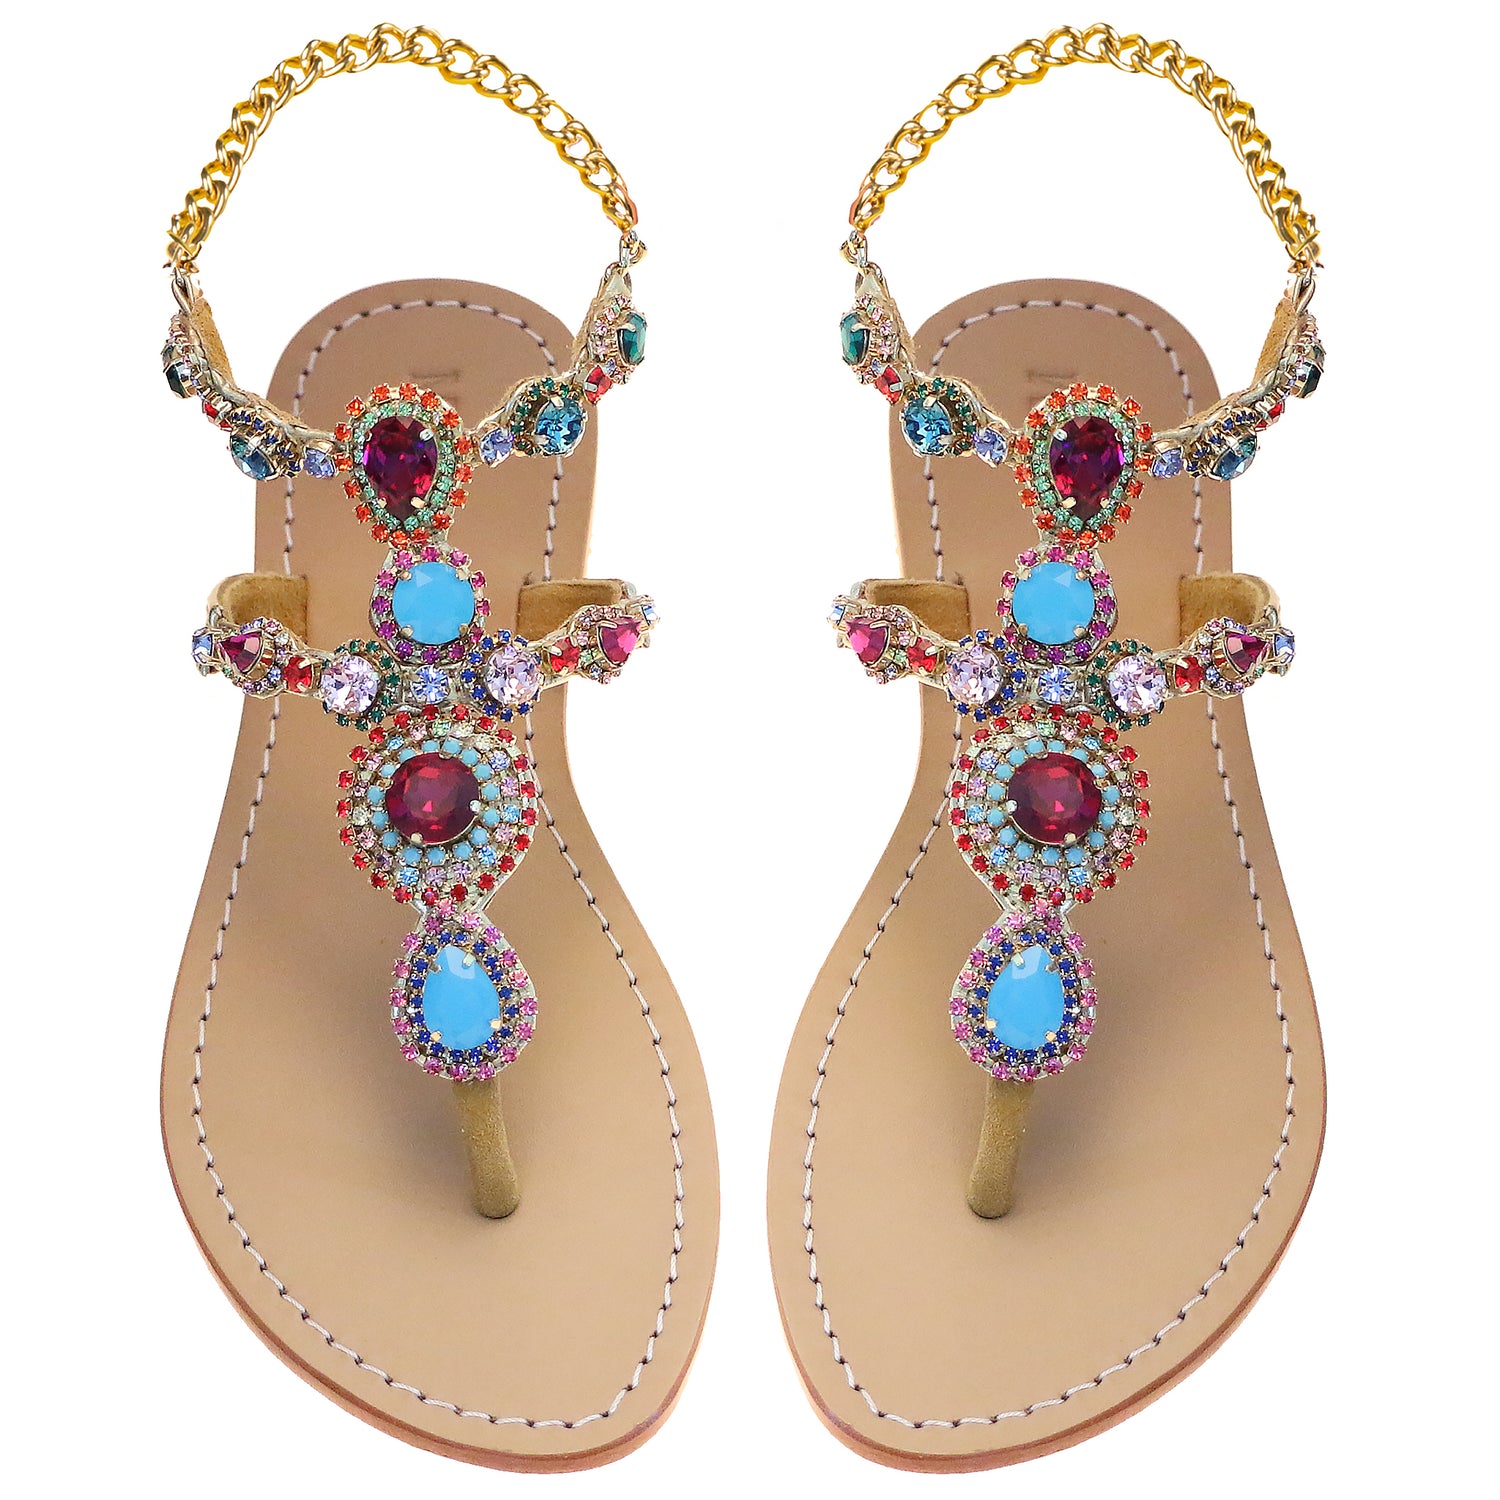 Palermo-Women's Multi-Colored Leather Jeweled Sandals|Mystique Sandals